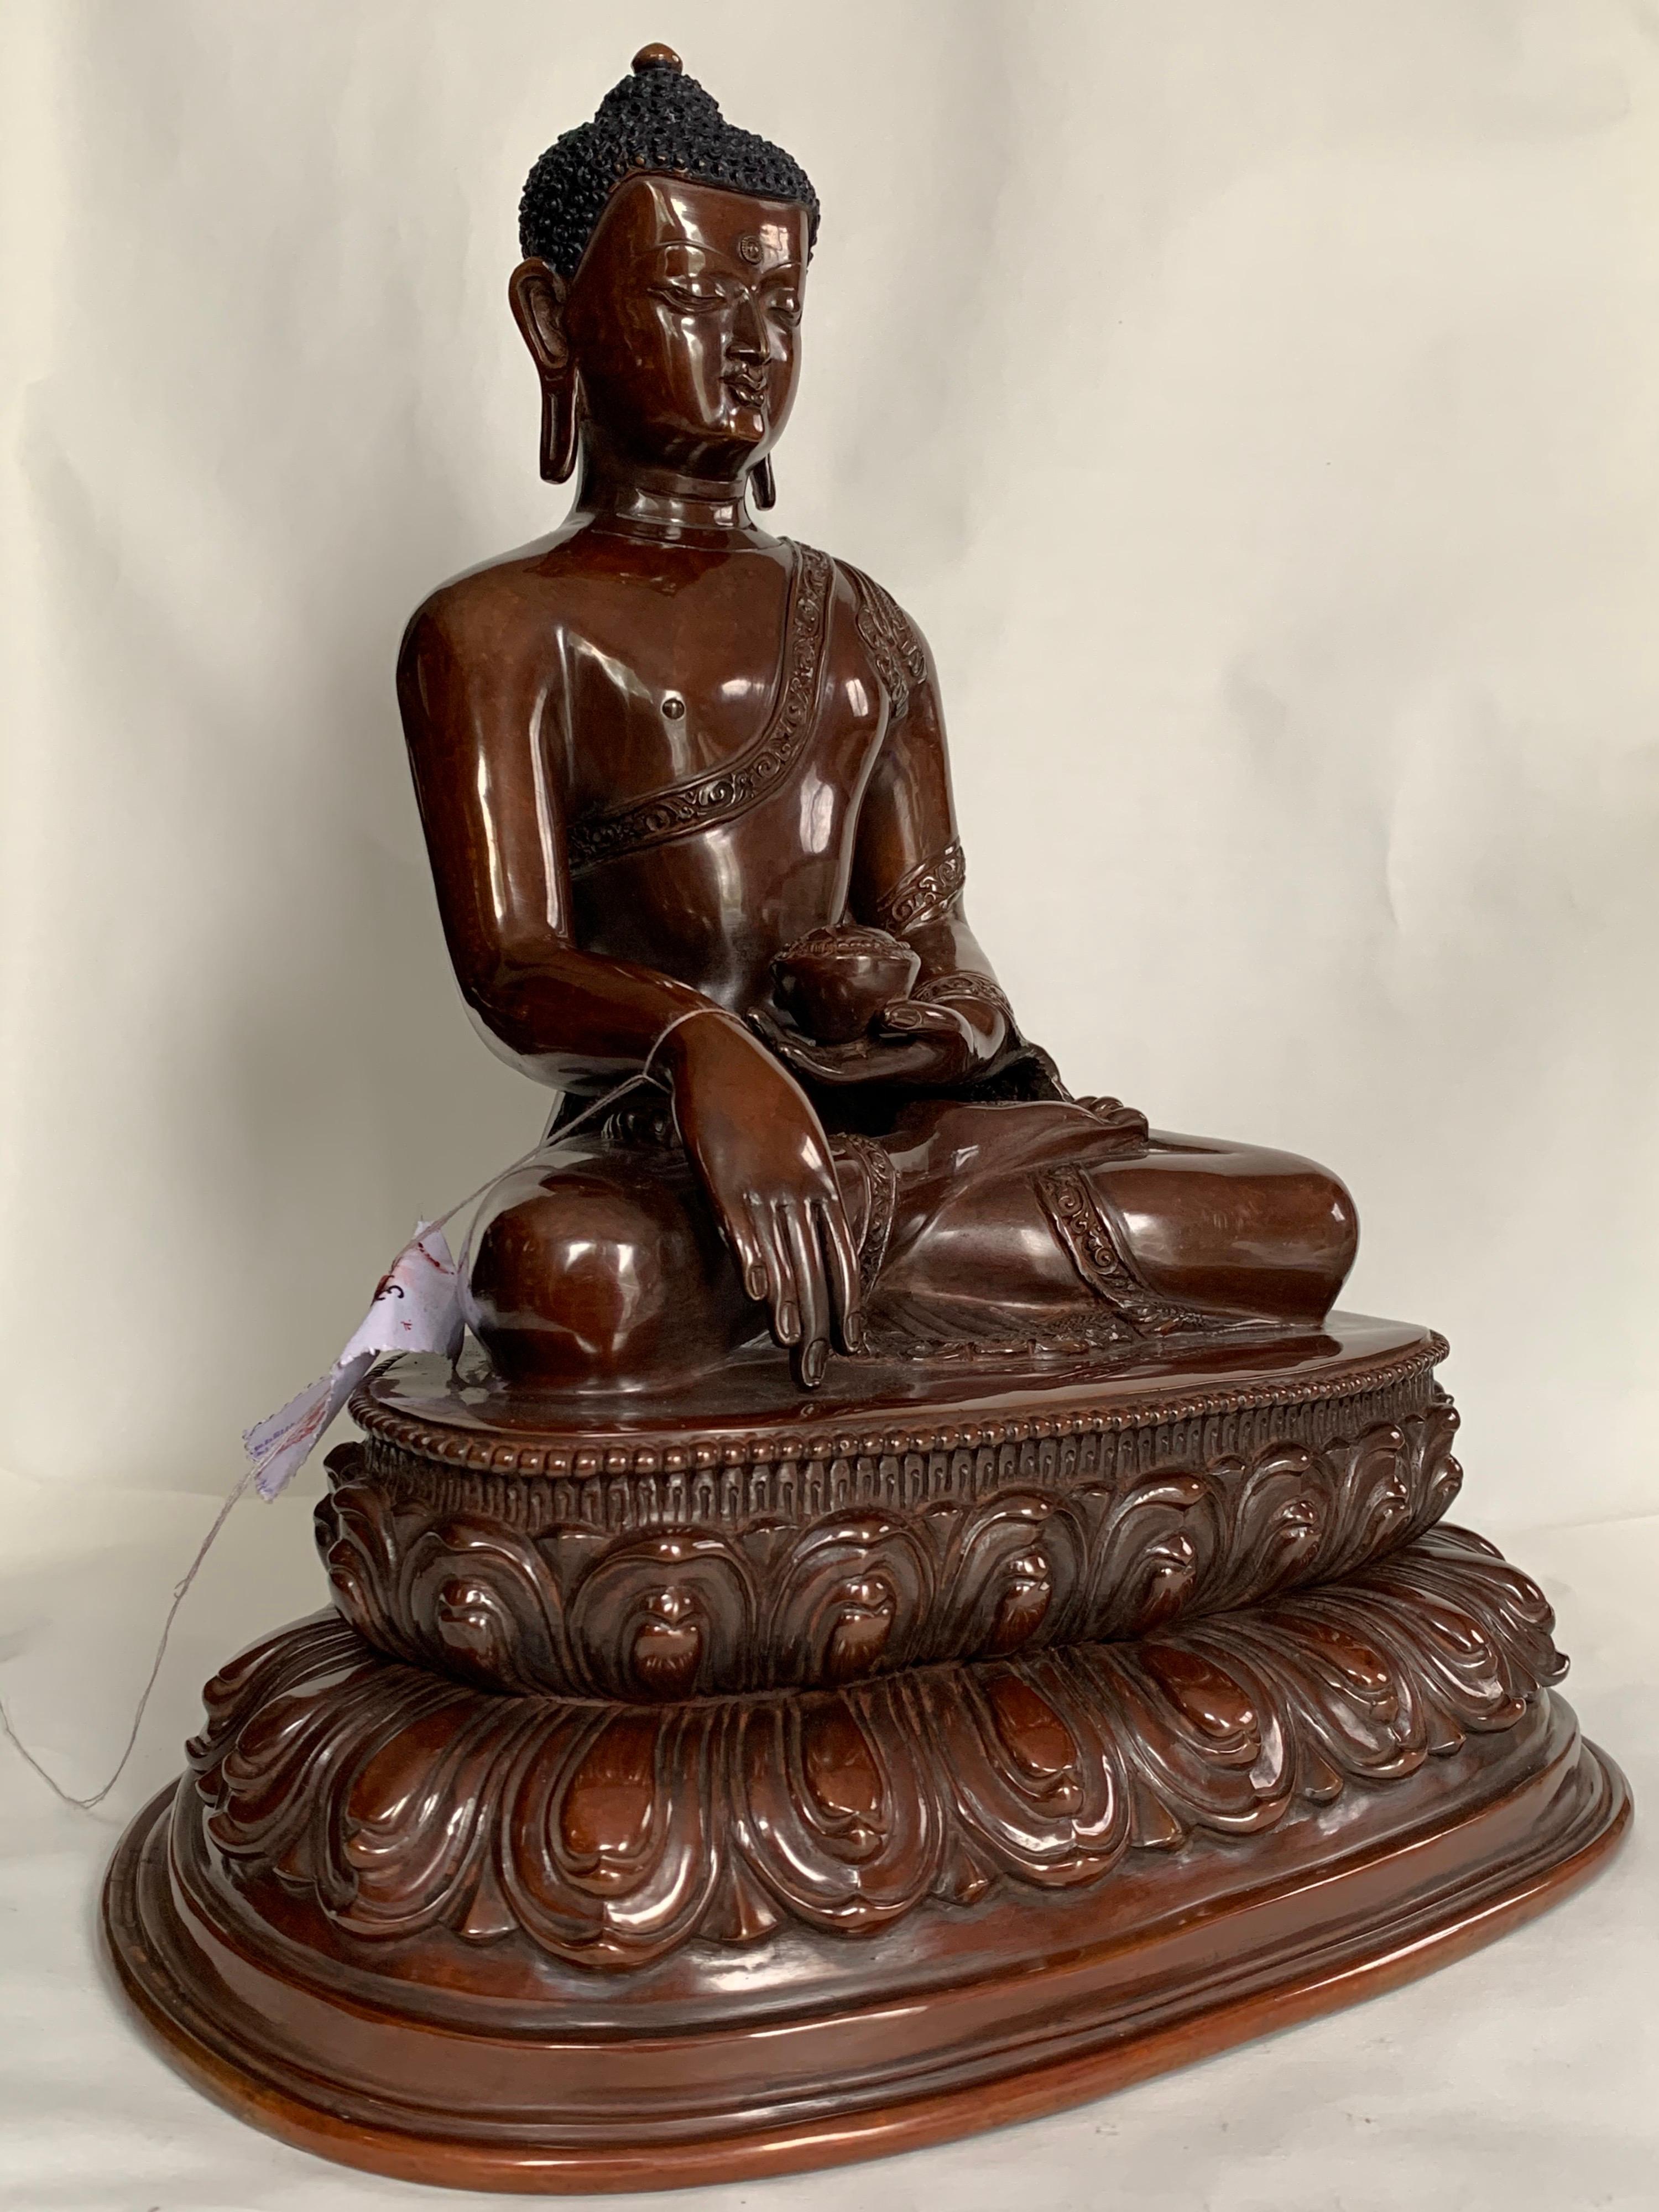 Buddha Statue 12 Inch Handcrafted by Lost Wax Process - Sculpture by Unknown